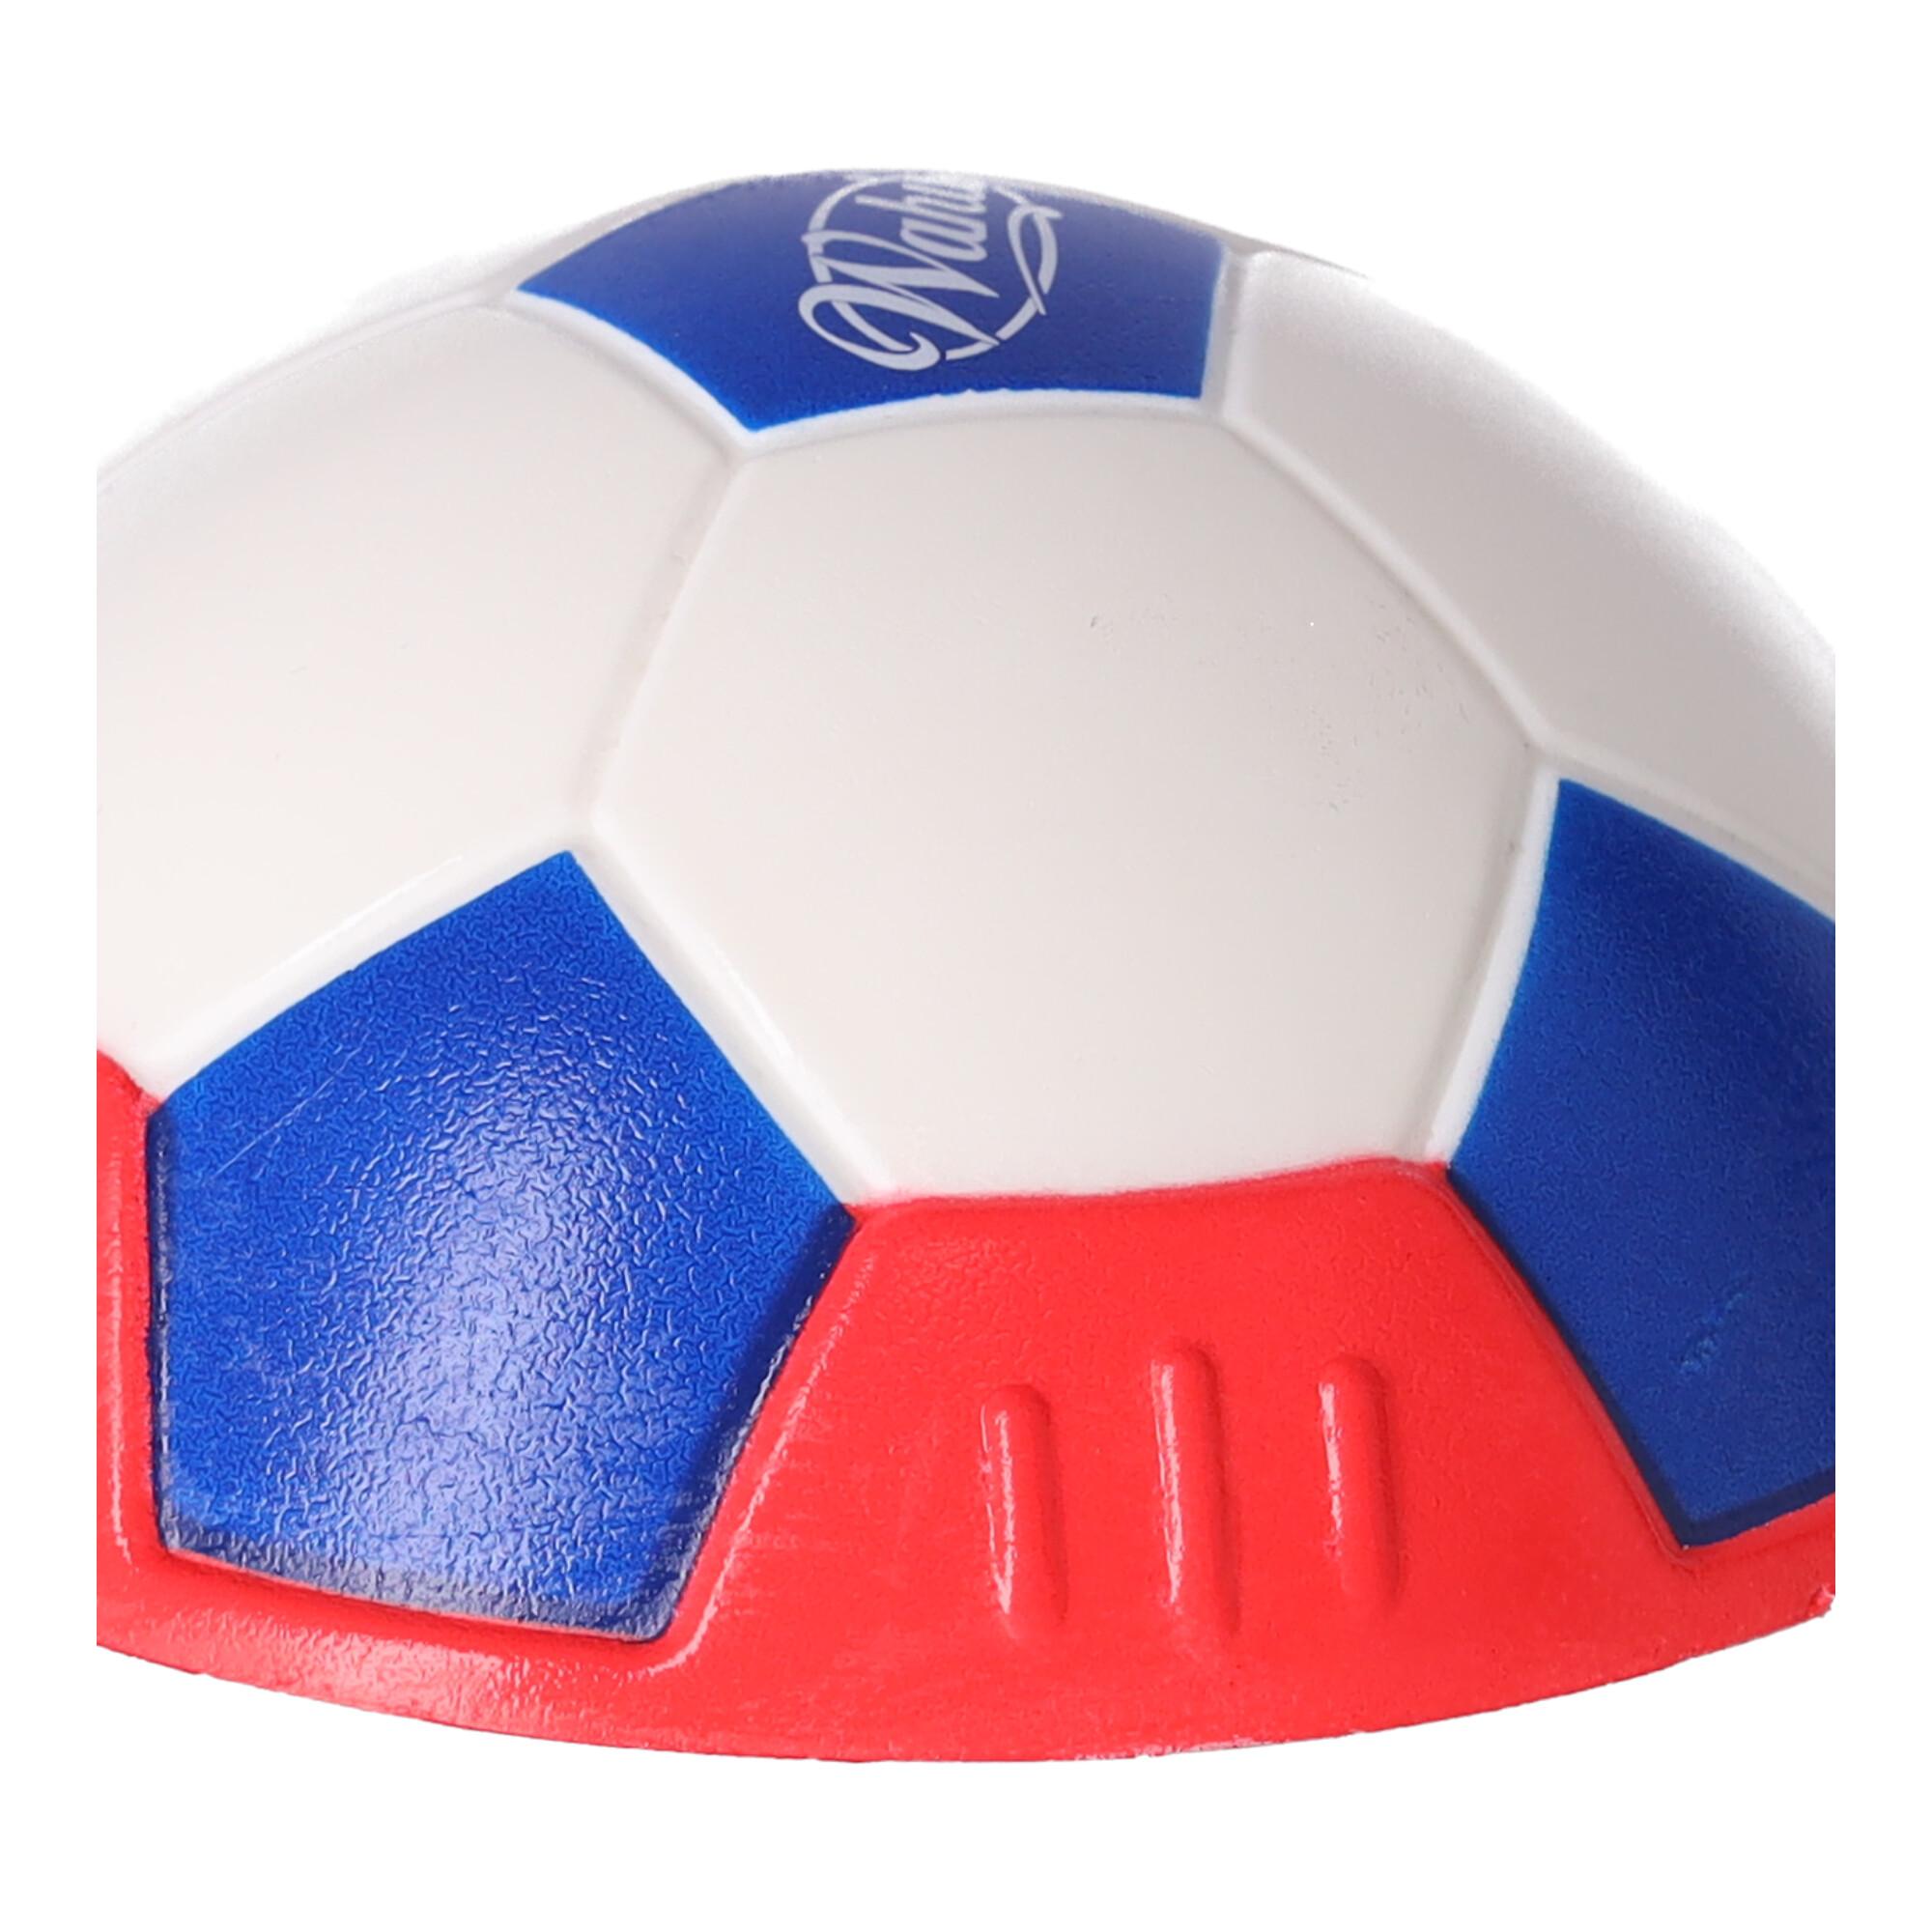 Goliath: Wahu Phlatball - HooverBall Assortment - blue red